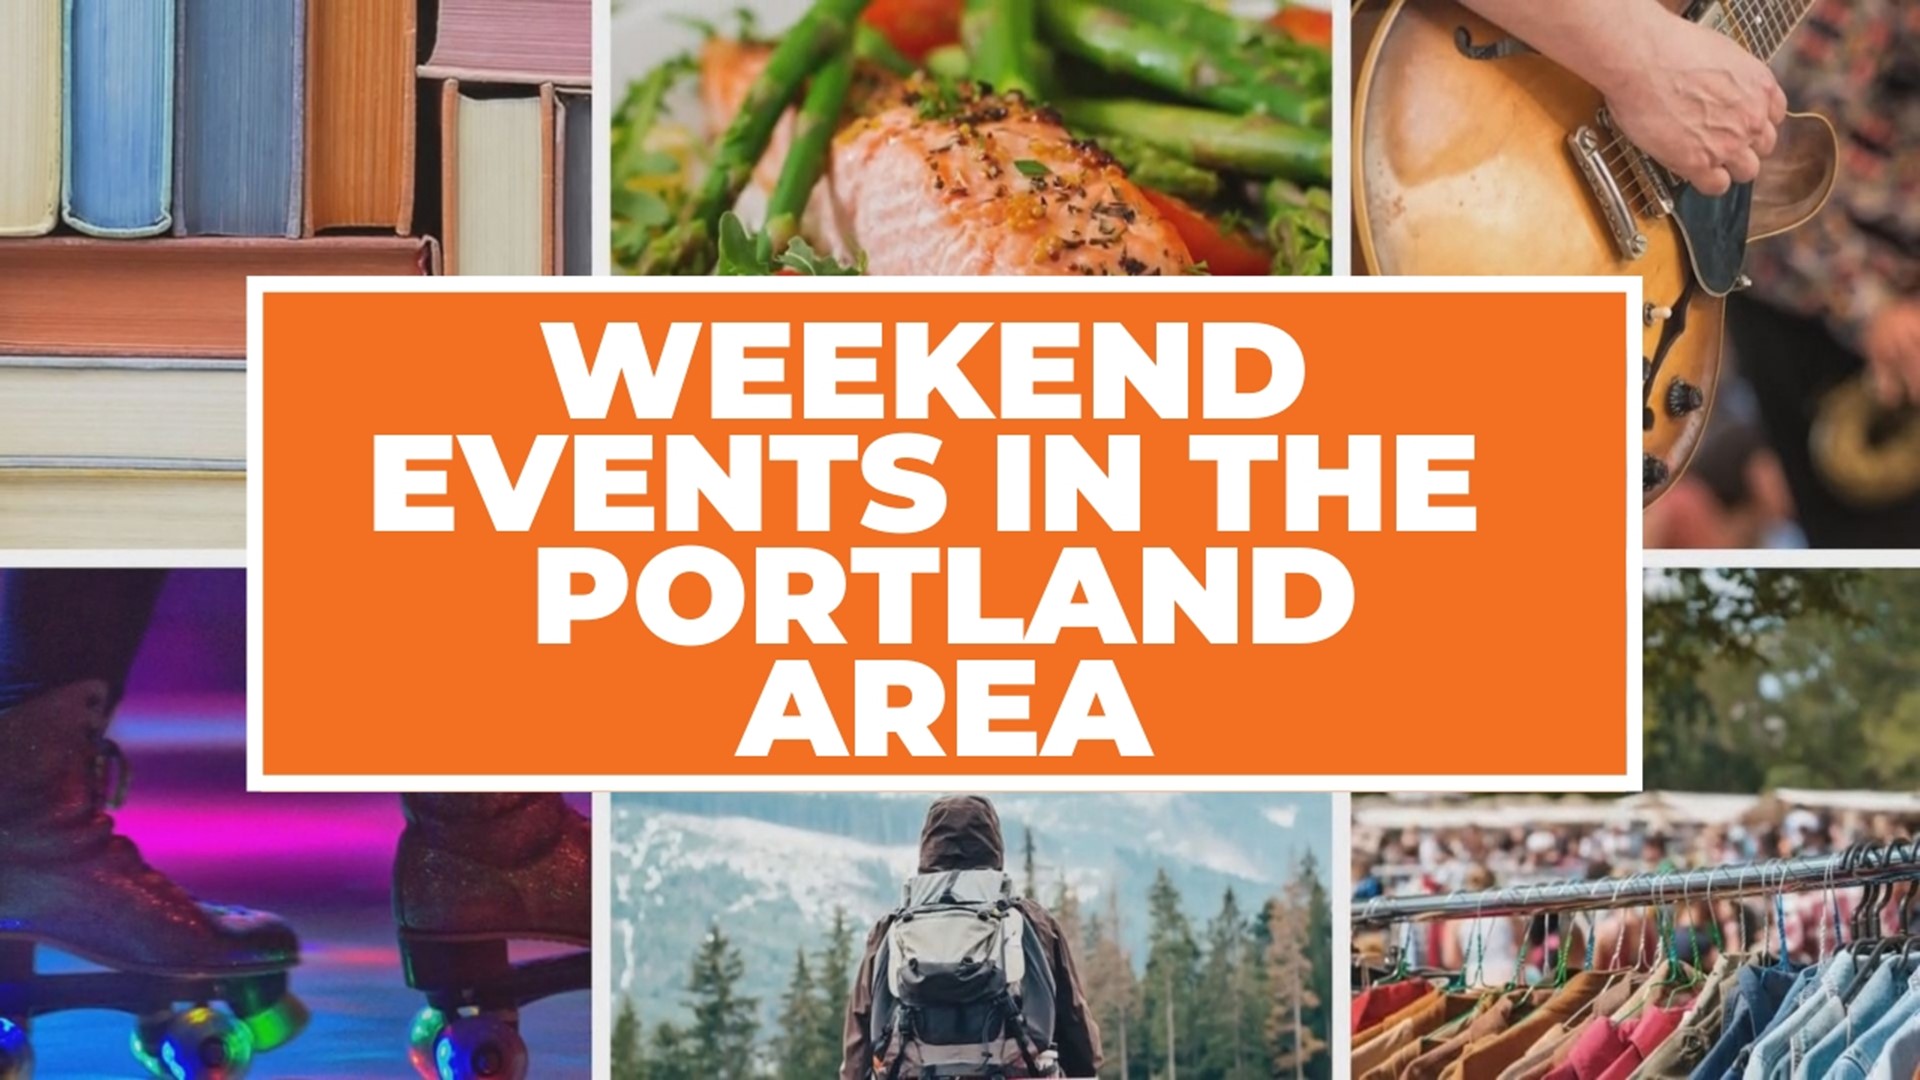 It's the third weekend in May and the sun is still shining. This weekend brings an annual art walk, a wedding expo, Kali Uchis, McMenamins UFO Festival and more.